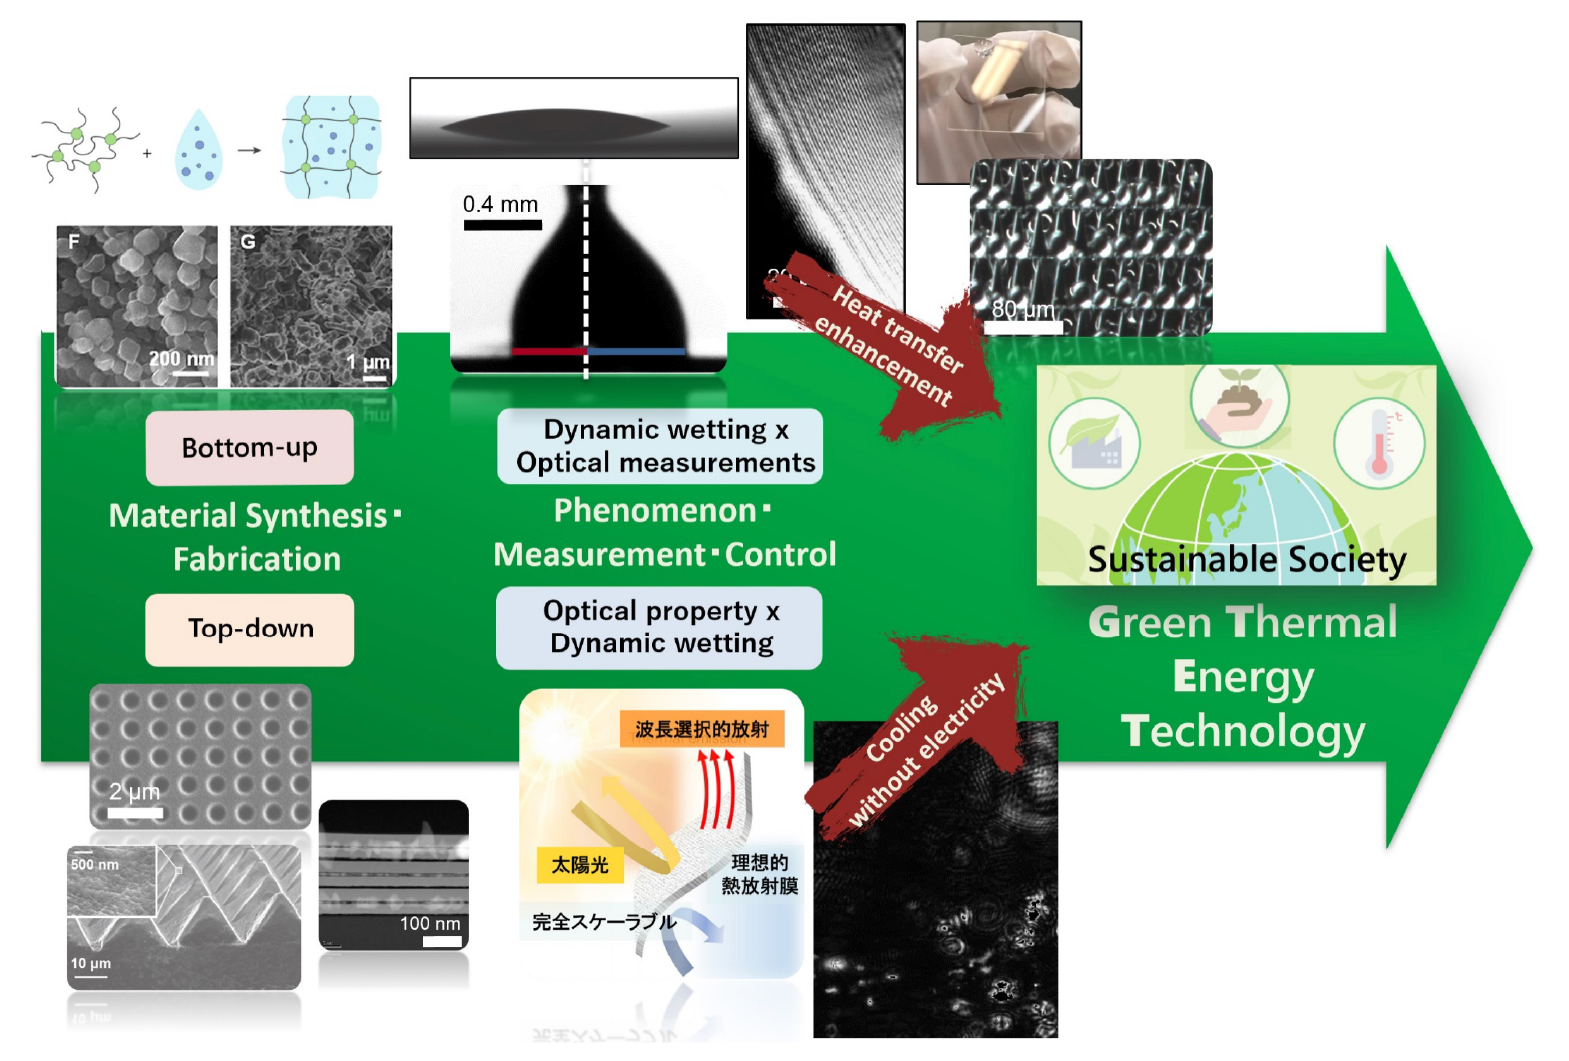 Development of green thermal energy management technology based on understanding of dynamic wetting at solid-liquid interface